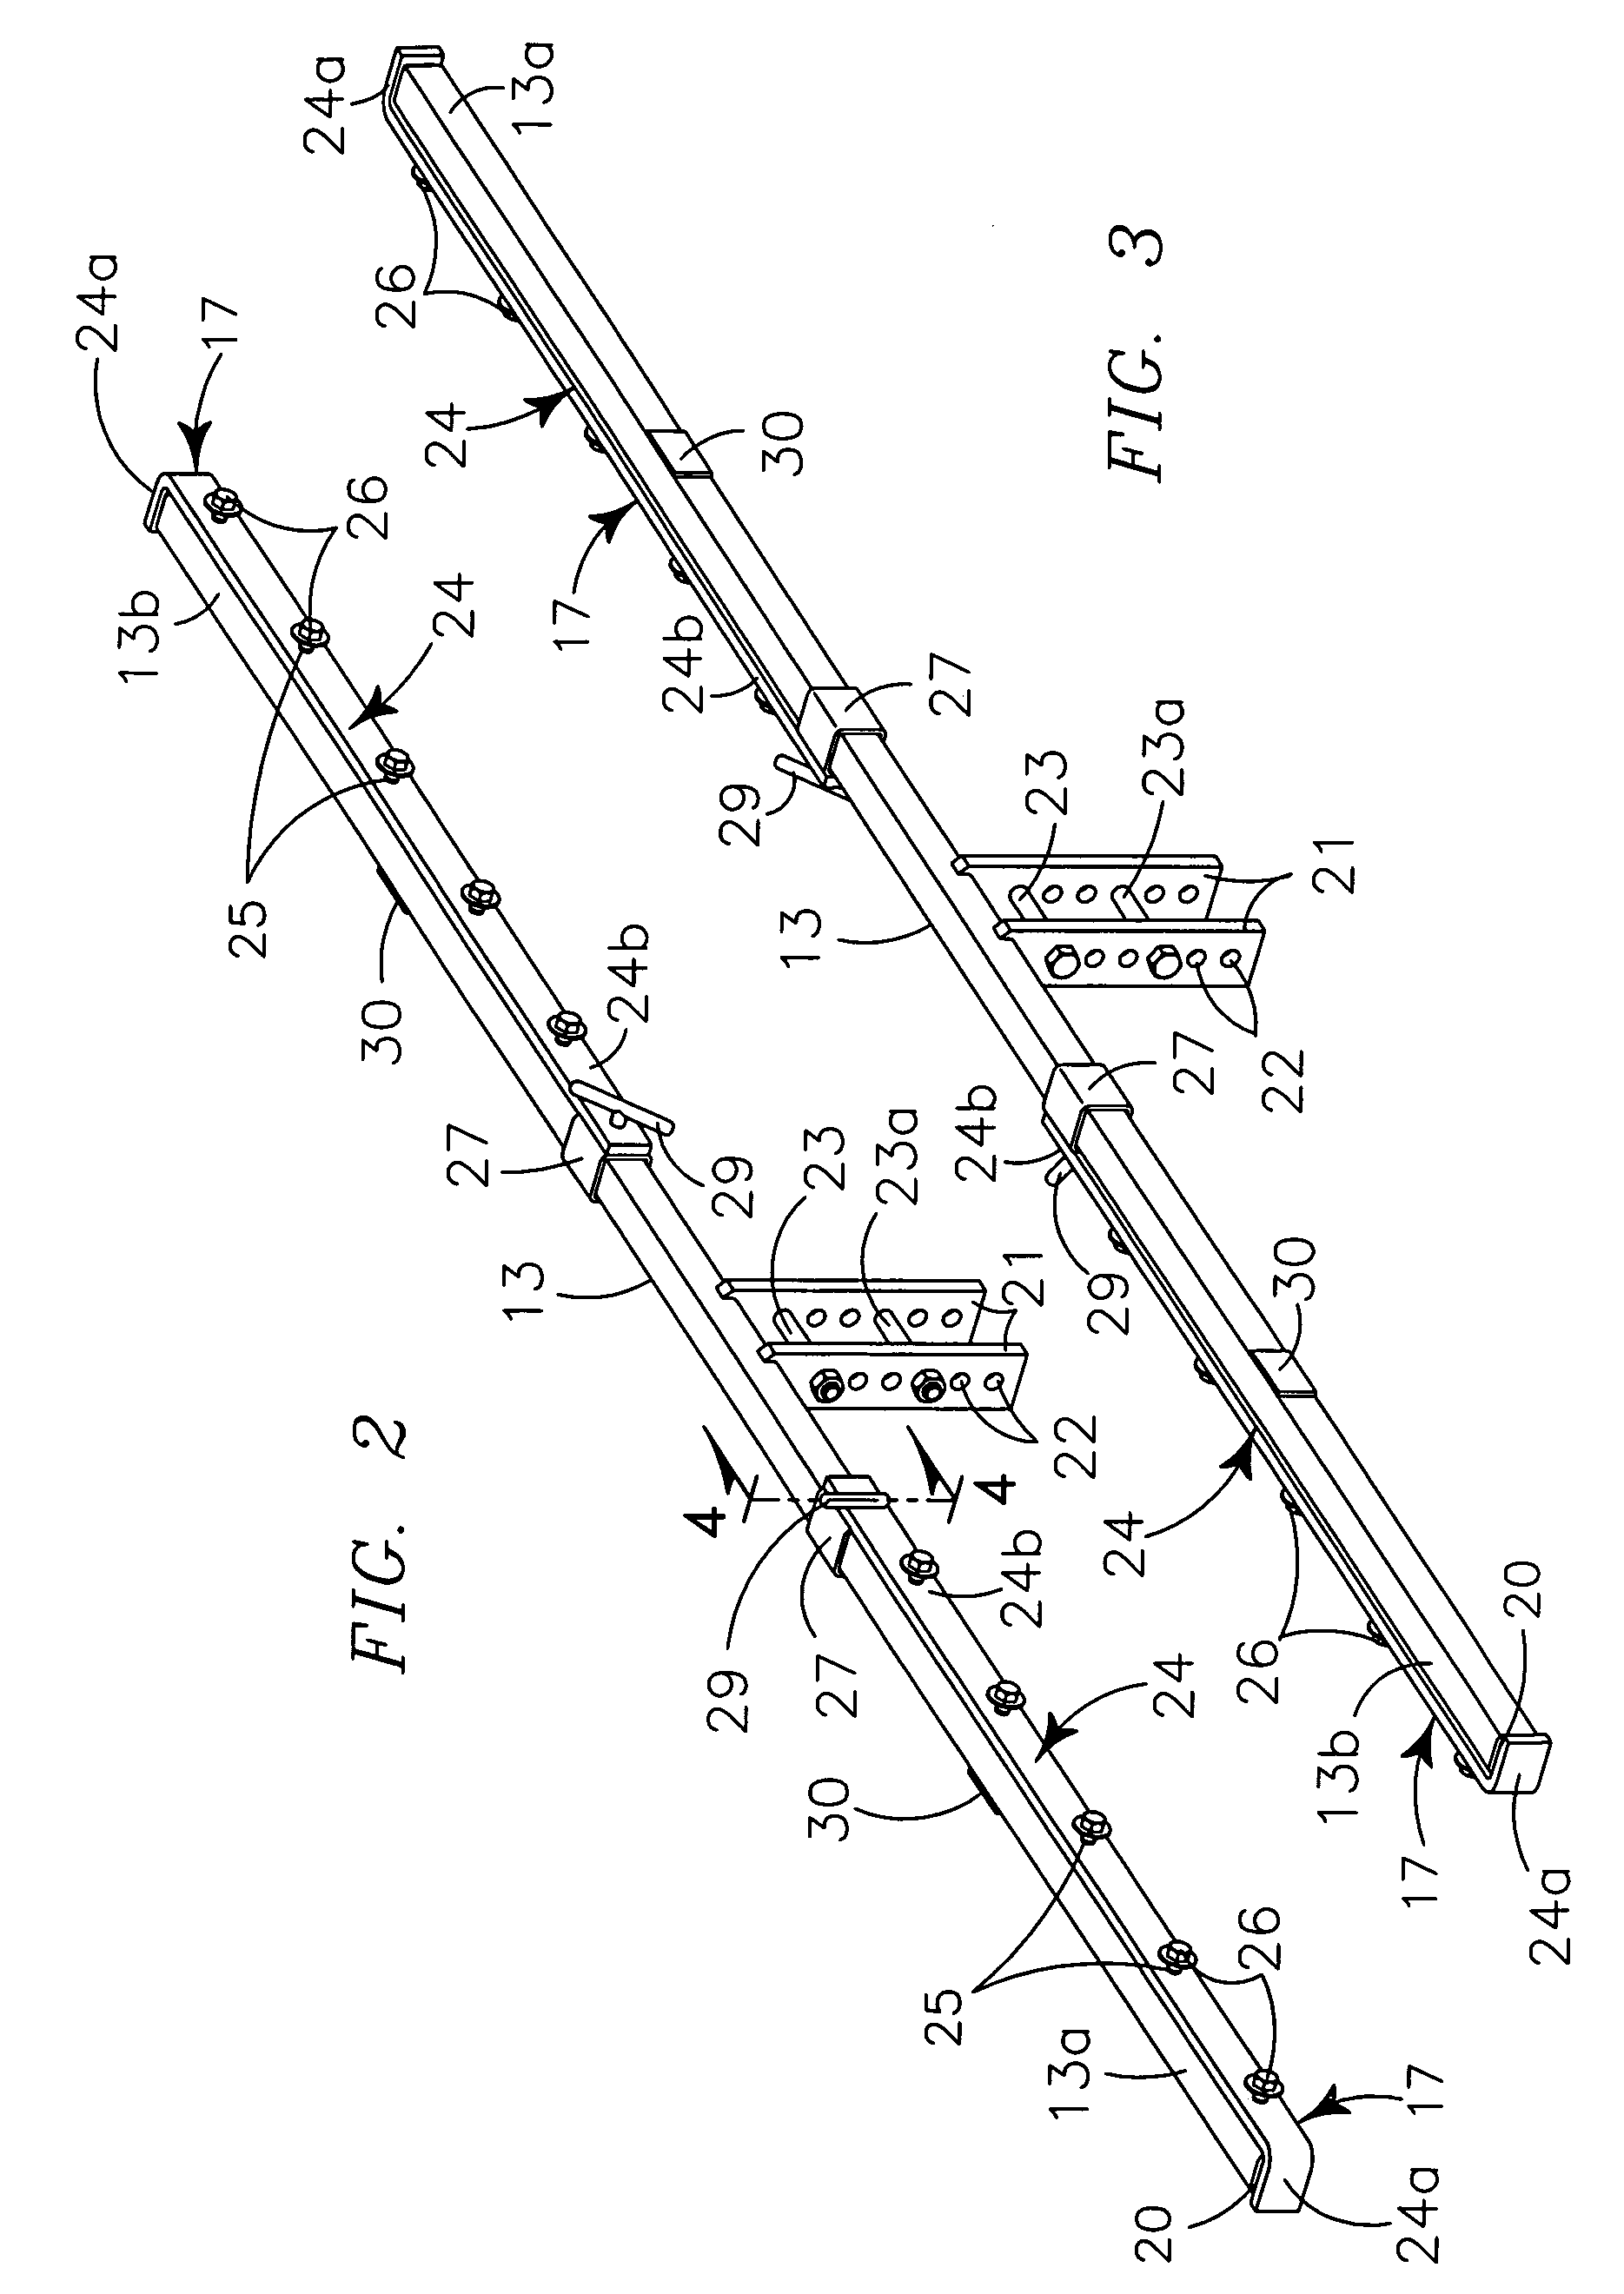 Laterally extendible mud flap mounting assembly for vehicles